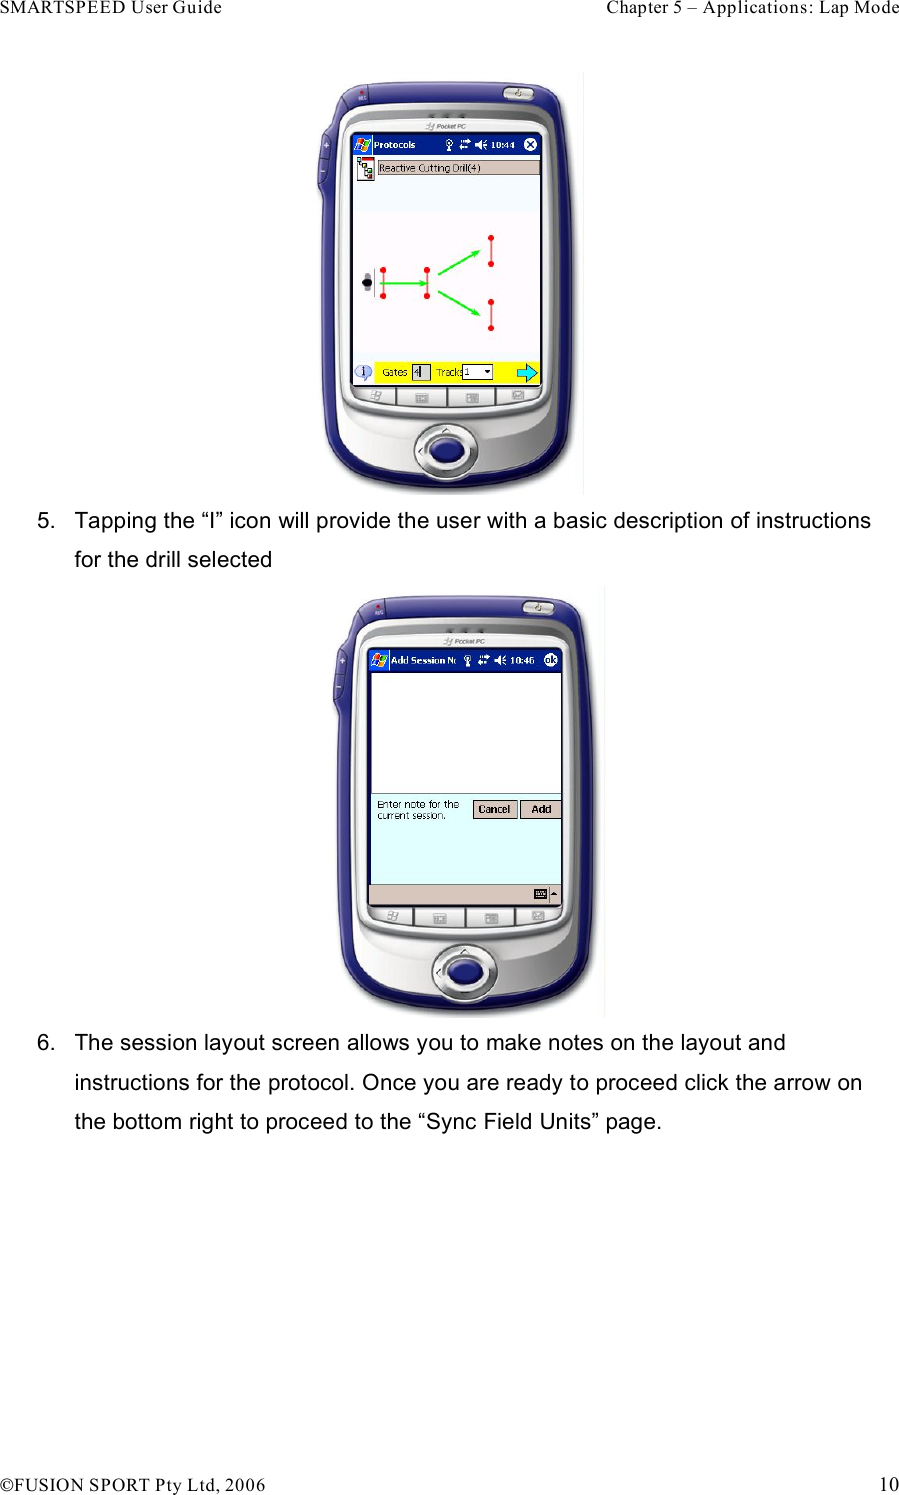 SMARTSPEED User Guide    Chapter 5 – Applications: Lap Mode !FUSION SPORT Pty Ltd, 2006    10  5.  Tapping the “I” icon will provide the user with a basic description of instructions for the drill selected   6.  The session layout screen allows you to make notes on the layout and instructions for the protocol. Once you are ready to proceed click the arrow on the bottom right to proceed to the “Sync Field Units” page. 